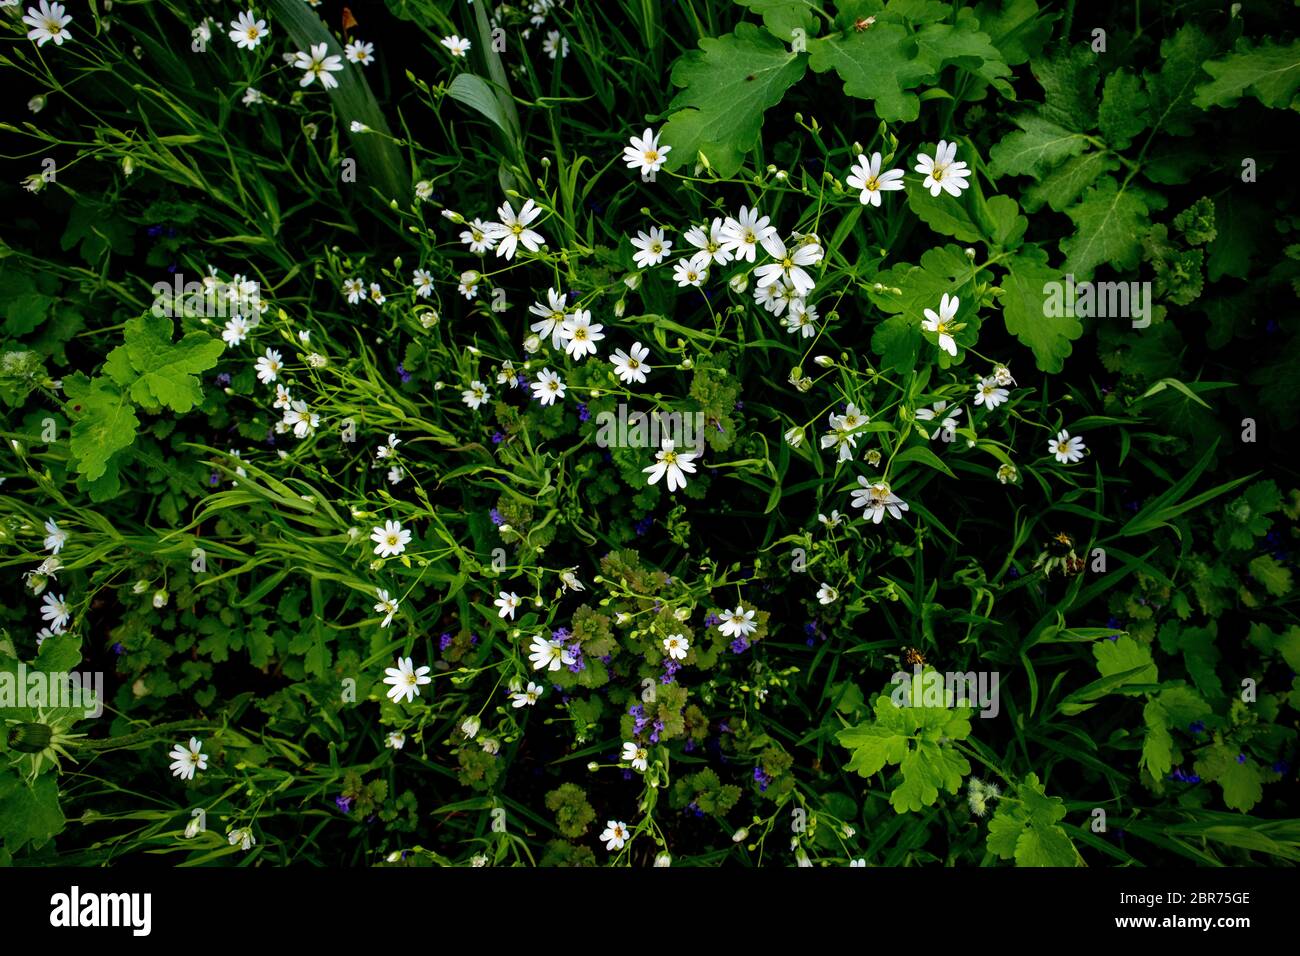 Field of white stellaria media flowers in the forest. Stock Photo